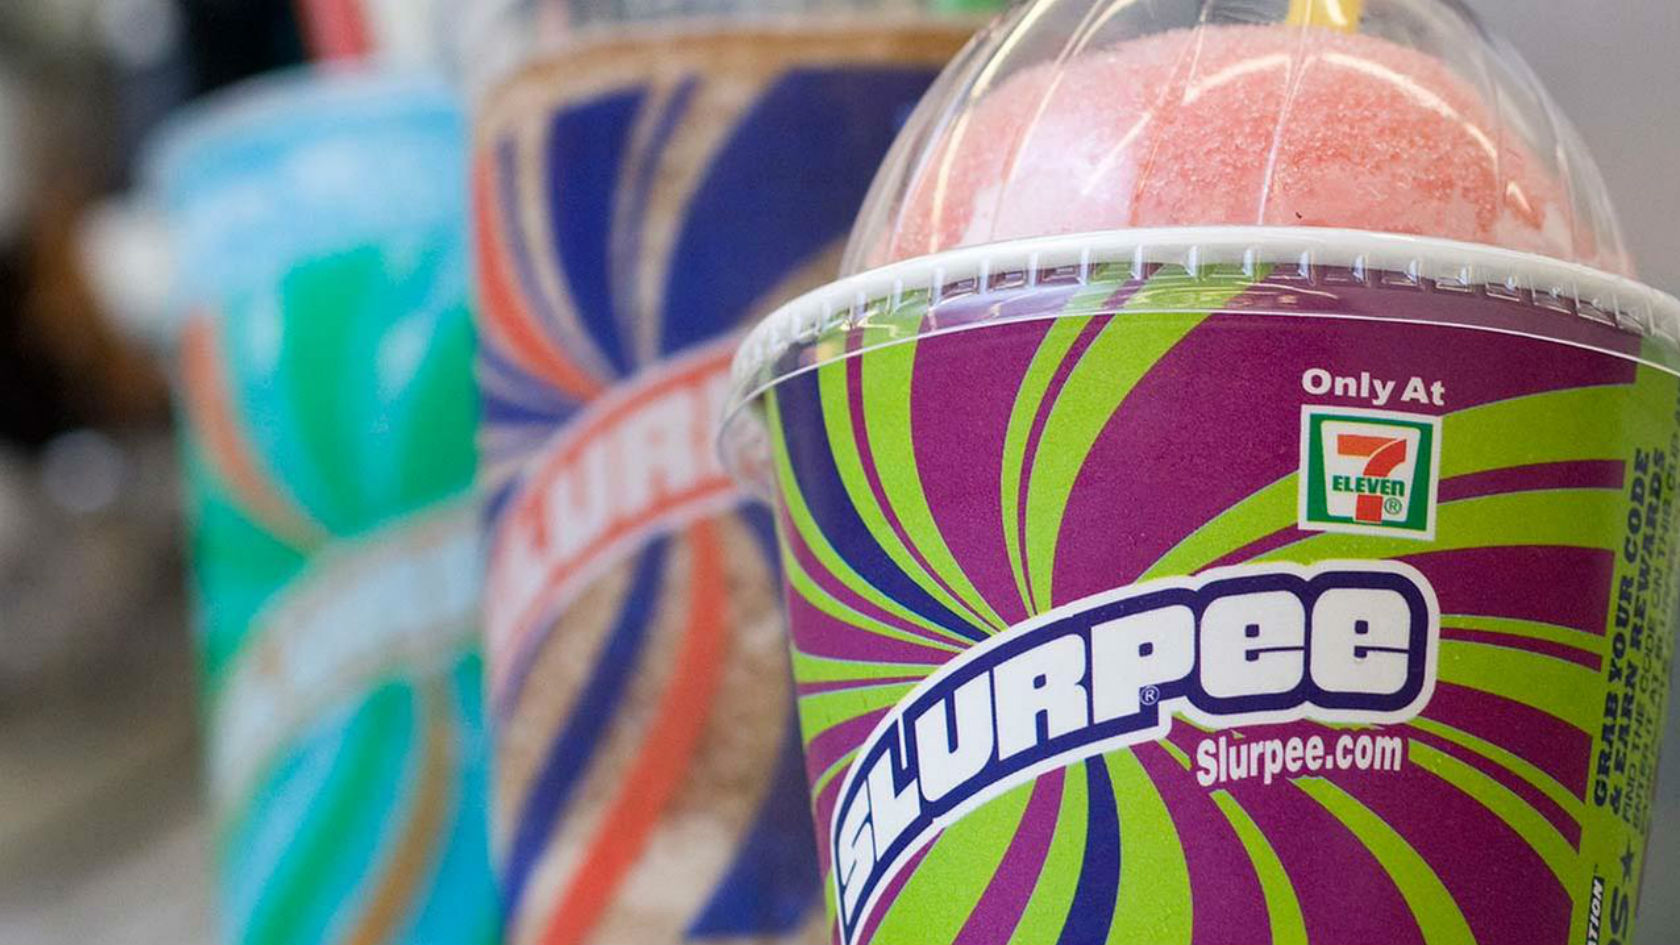 7Eleven Is Giving Away Free Slurpees & Lots Of Free Money Today